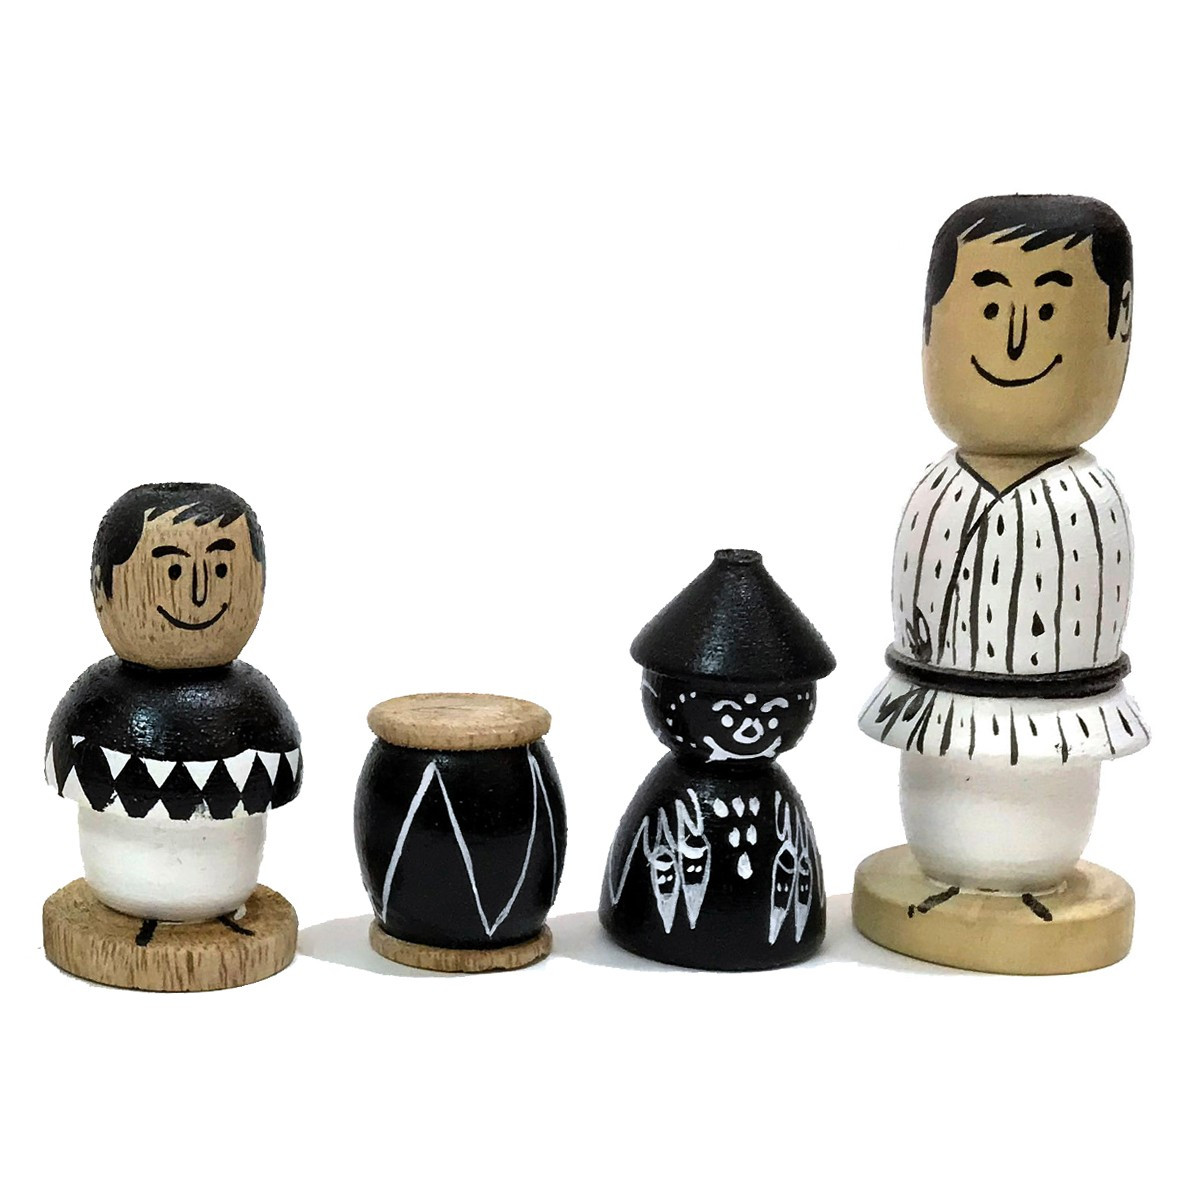 Mini Set (Set of 8 wooden figures inspired from the stories of Satyajit Ray)